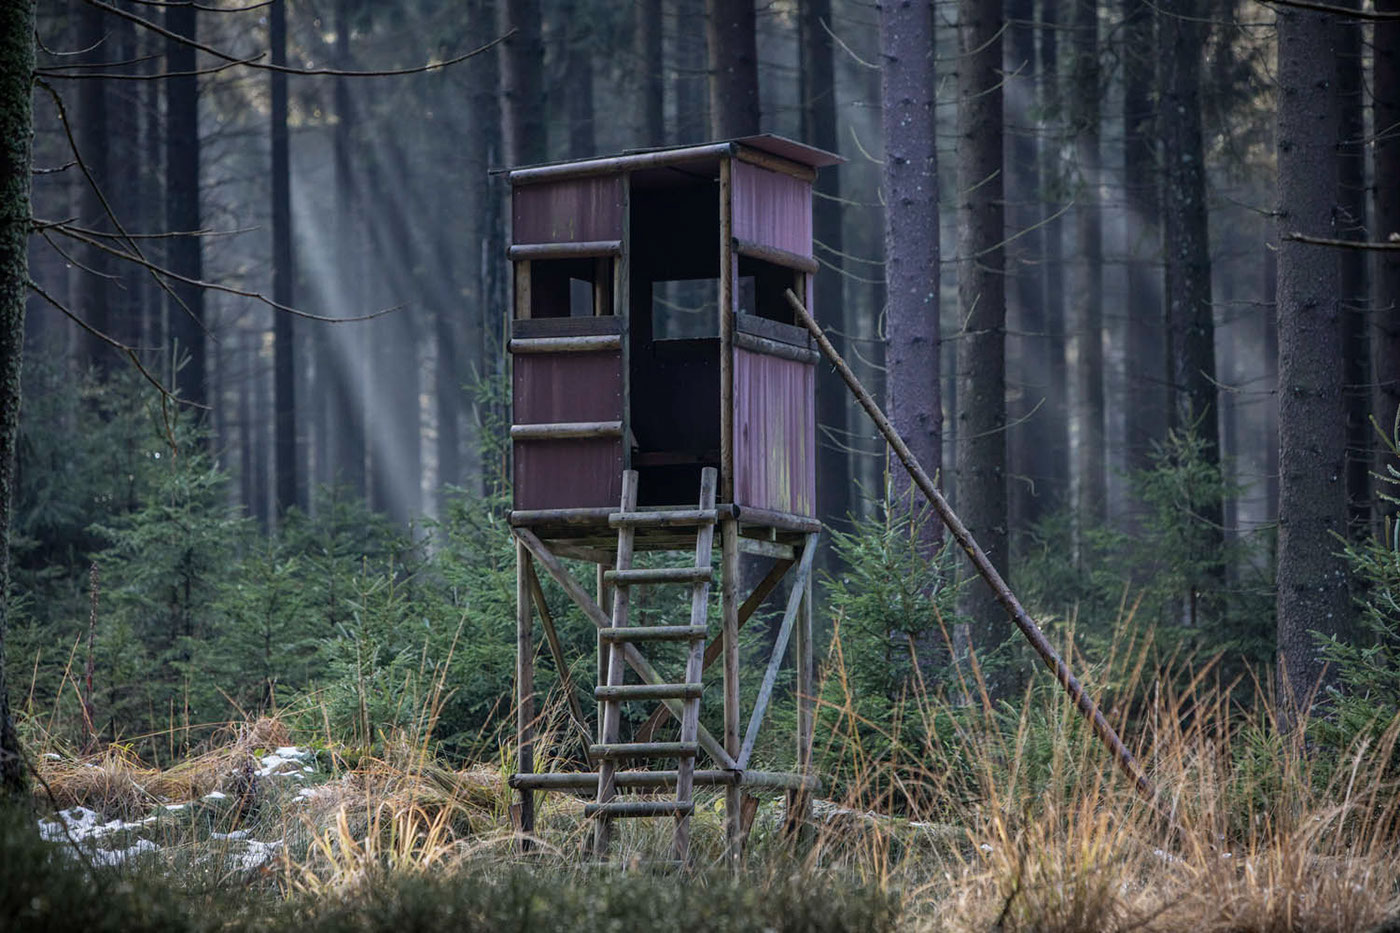 chasse Hunt Hunting Huntingtowers Lookout tower forest Hunting season